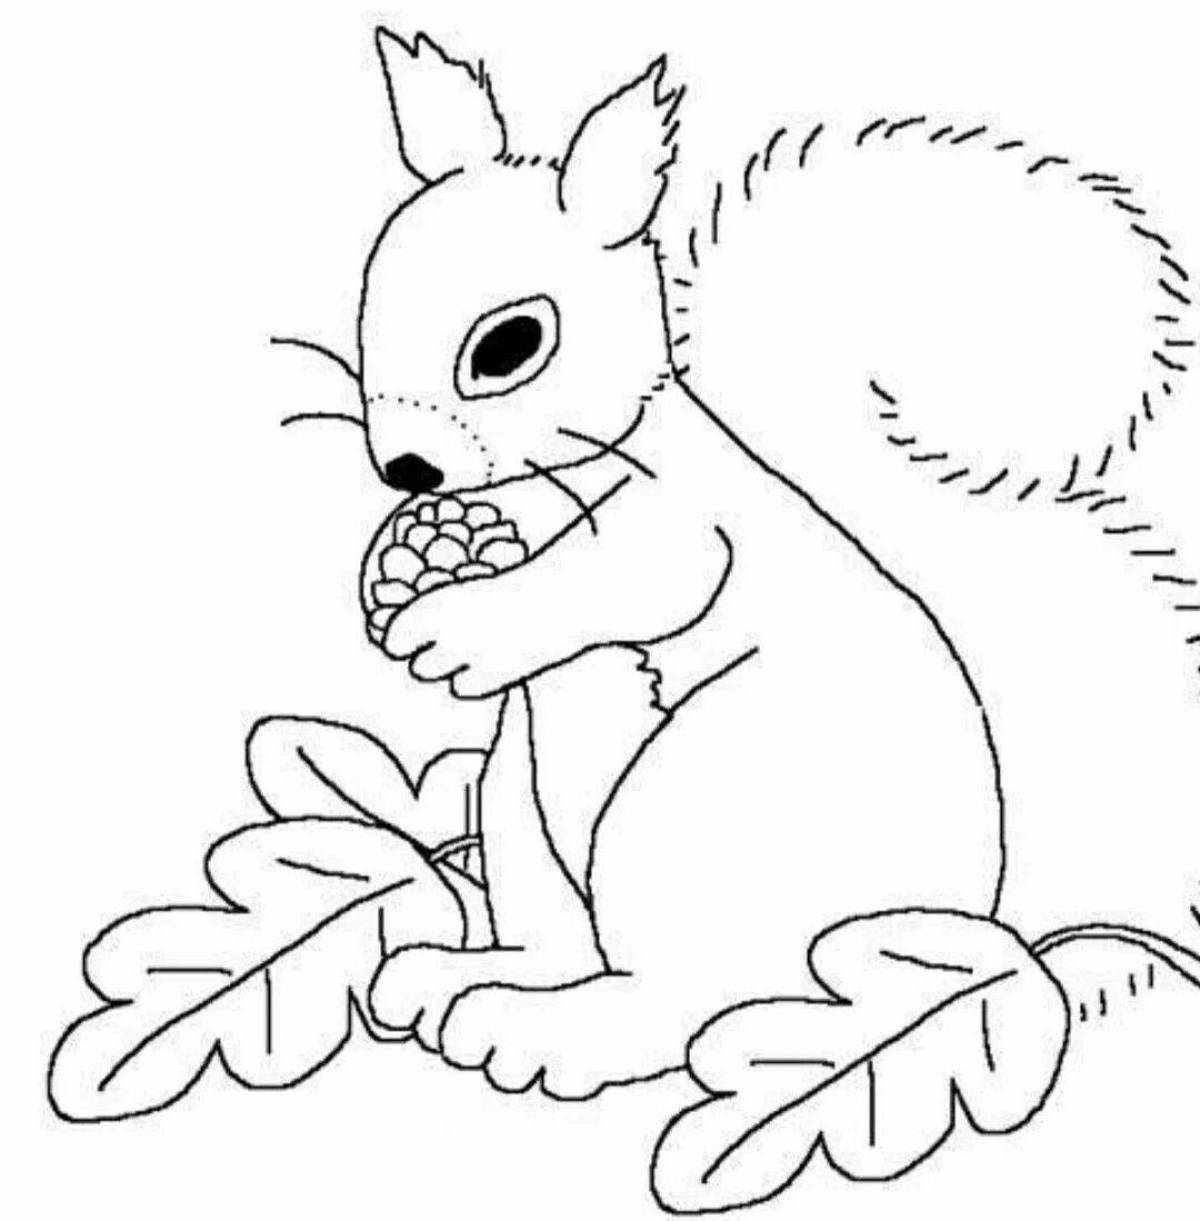 Cute forest animals coloring book for 5-6 year olds